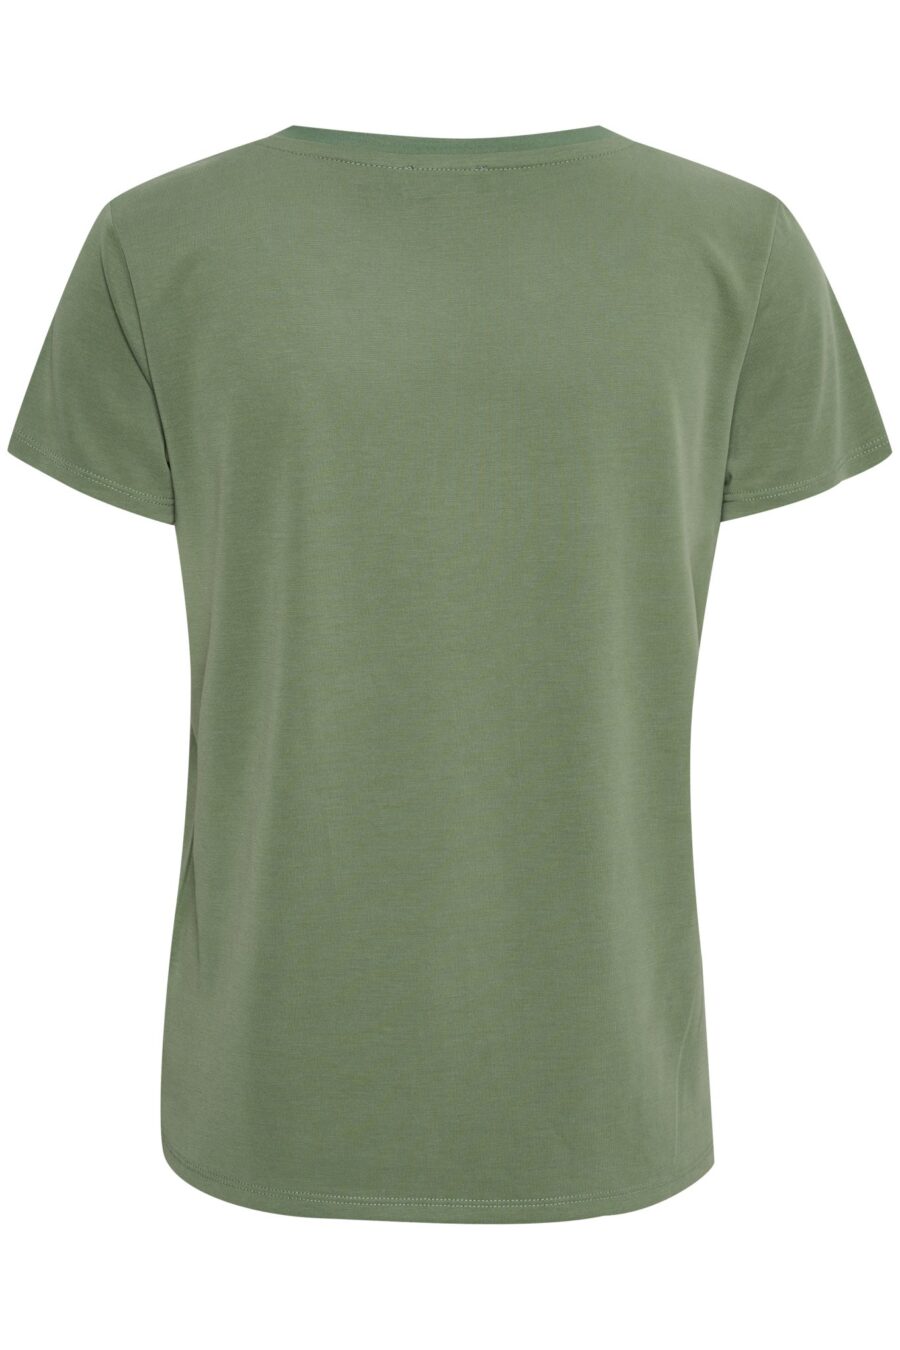 SOAKED IN LUXURY Columbine v-neck tee FROST Khaki Soft Touch Top